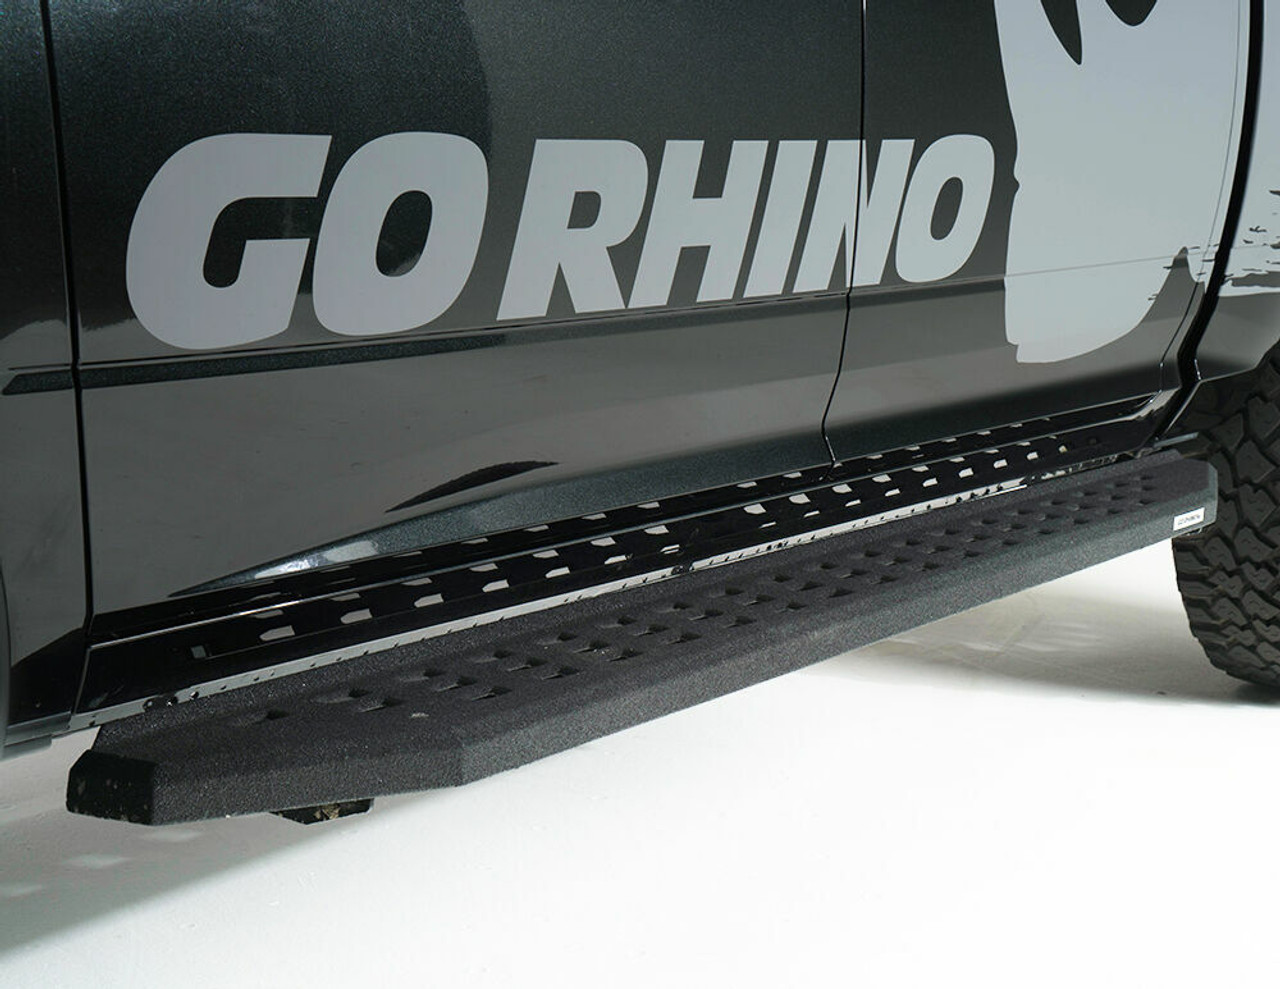 Go Rhino 69404787PC Chevrolet, Silverado 1500 LD (Classic), 2014 - 2019, RB20 Running boards - Complete Kit: RB20 Running boards + Brackets, Galvanized Steel, Textured black, 69400087PC RB20 + 6940475 RB Brackets, Classic Body Style Only